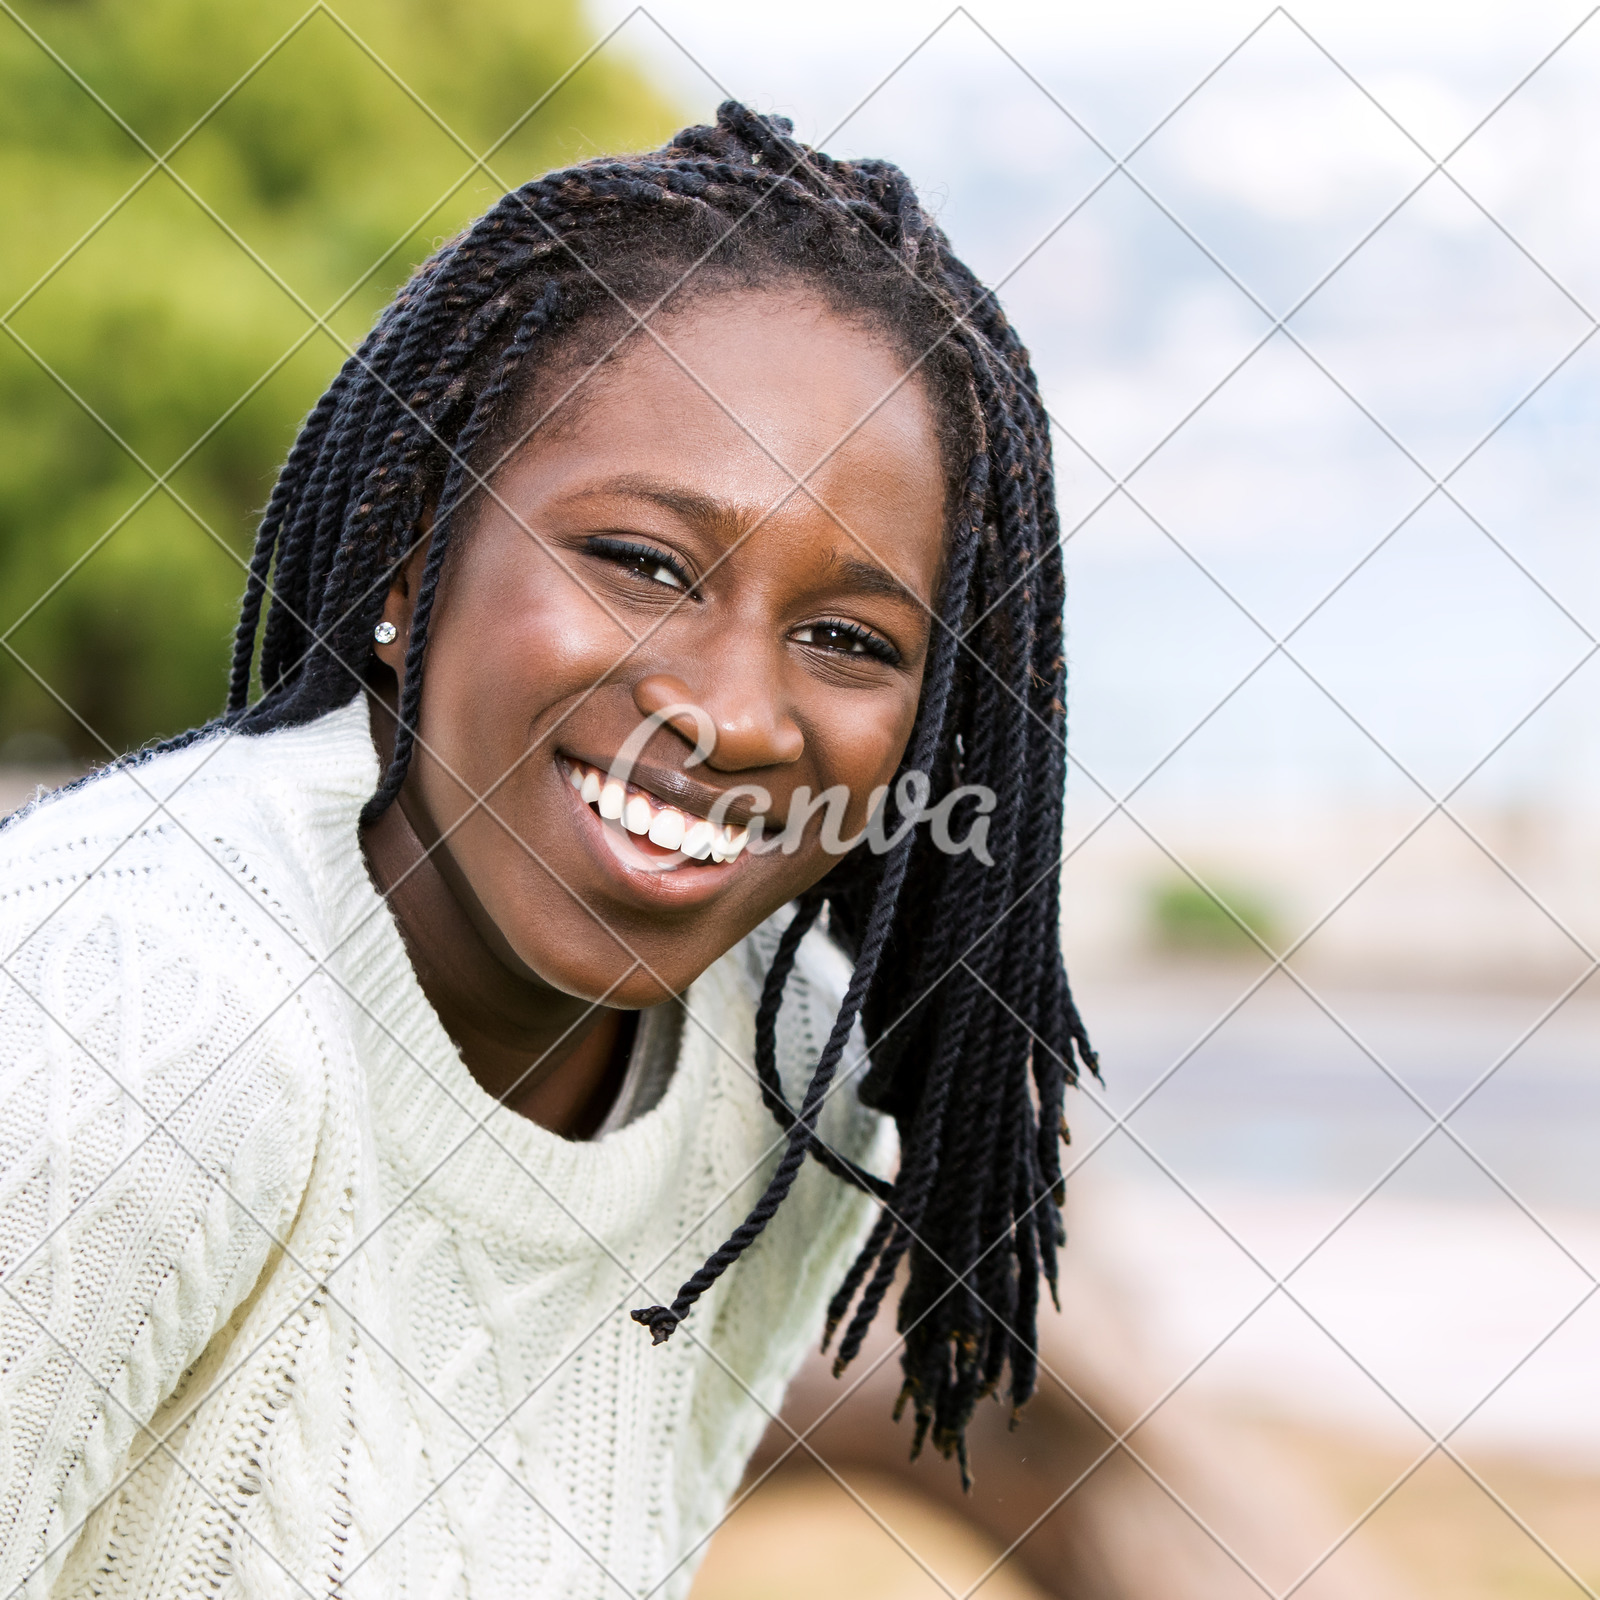 Cute African Teen Girl With Long Braided Hairstyle Photos By Canva